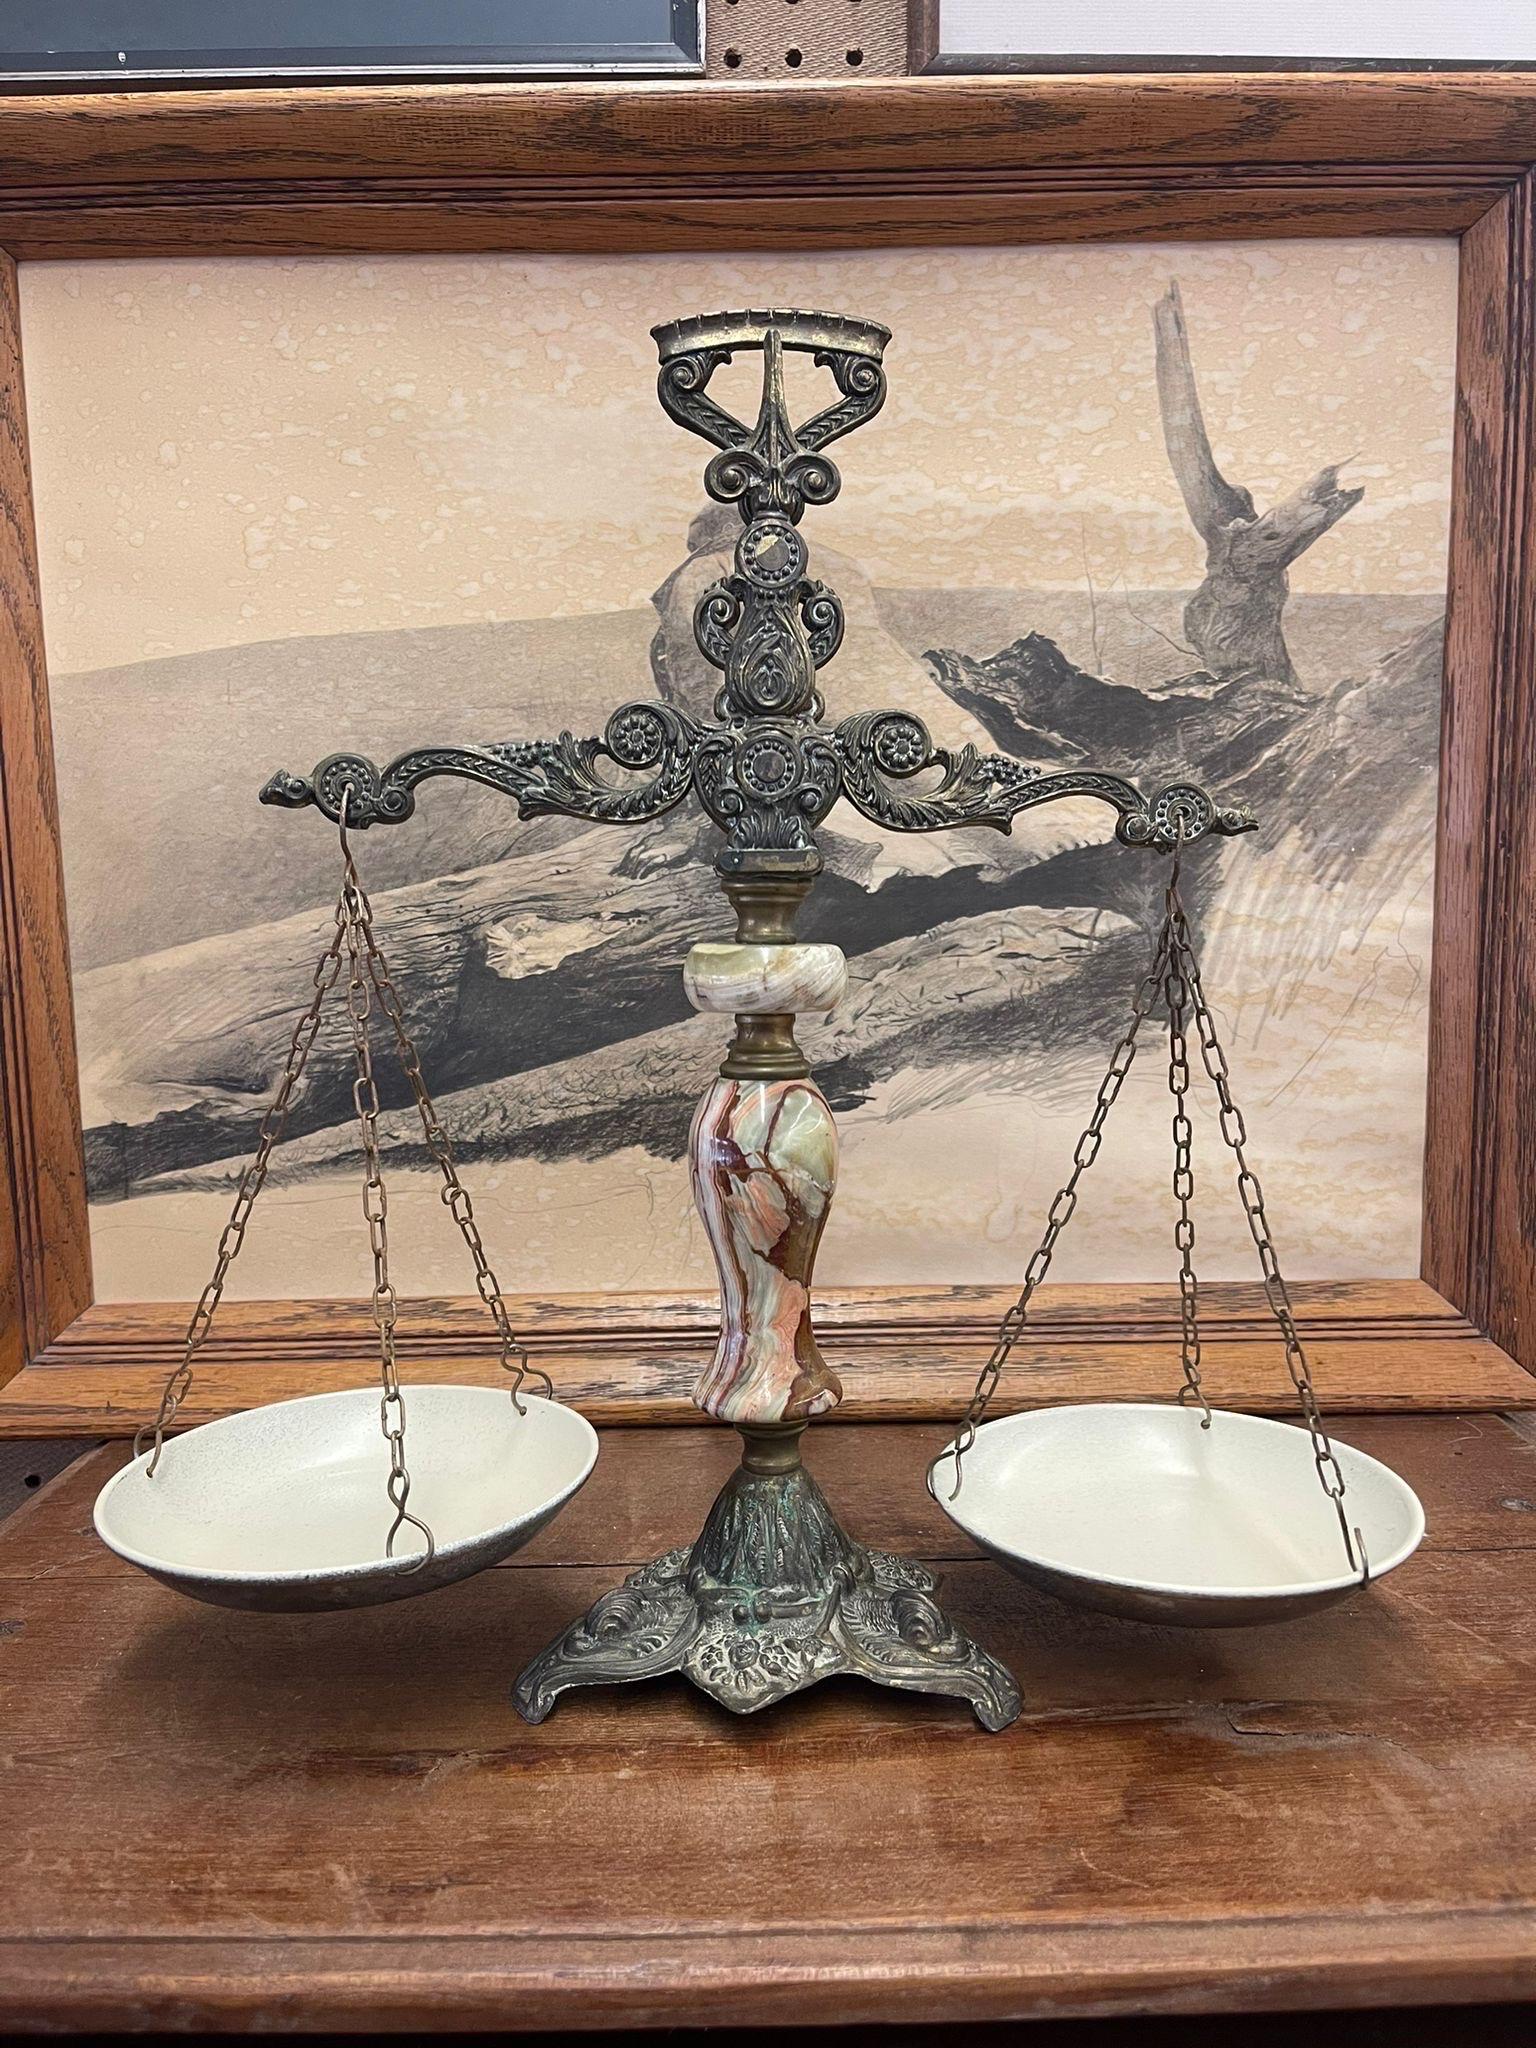 Intricate Detailing on the Scale Arms and Base. For Decorative Purposes. White Colored Scale Trays.Possibly Brass and Marble or Similar Material. Vintage Condition Consistent with Age as Pictured.

Dimensions. 16 W ; 5 1/2 D ; 15 1/2 H